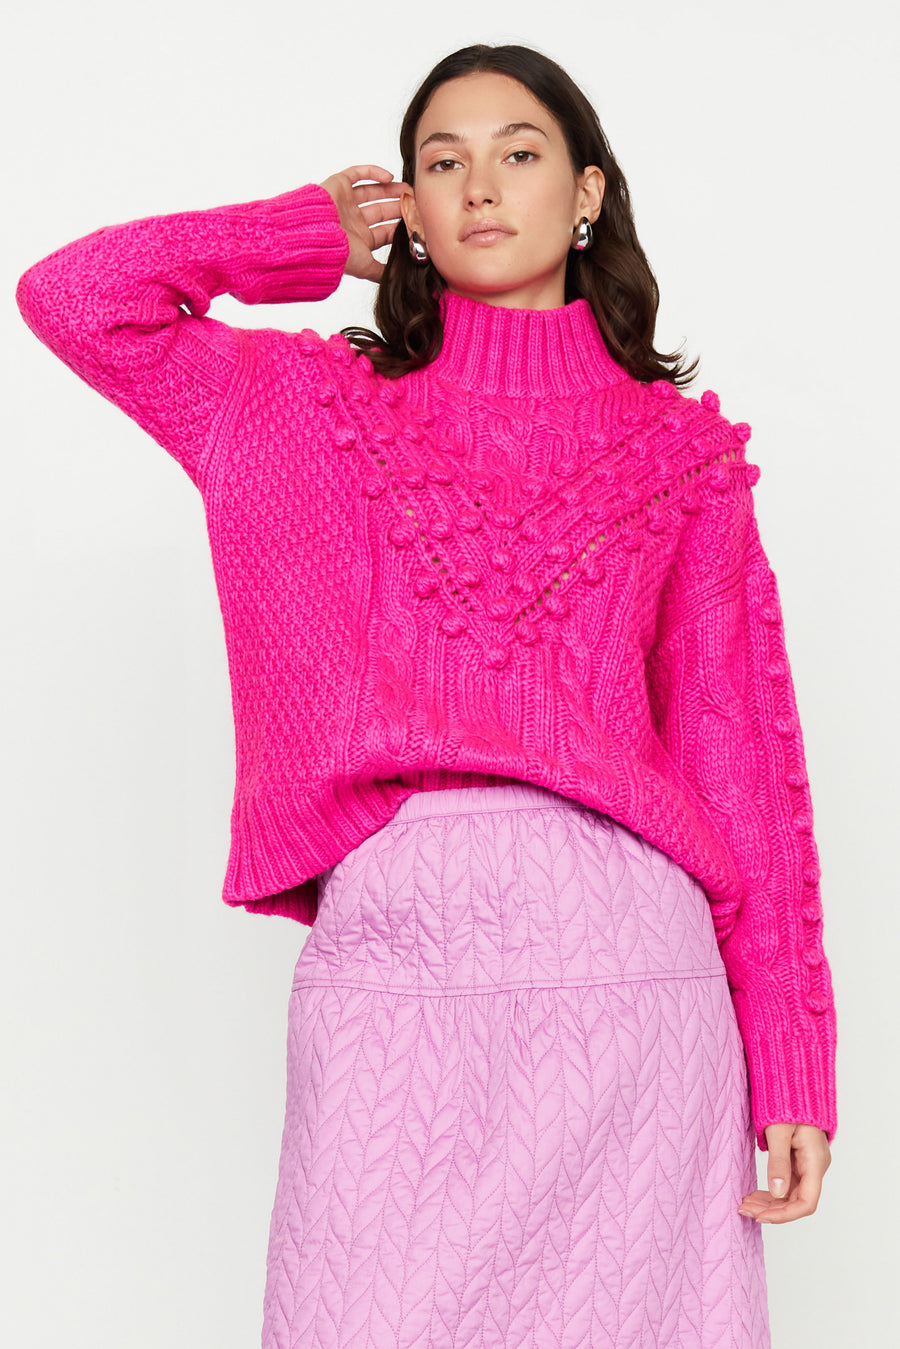 Knits - Sweaters, Tops, Tanks and Turtlenecks for Women - Marie Oliver ...